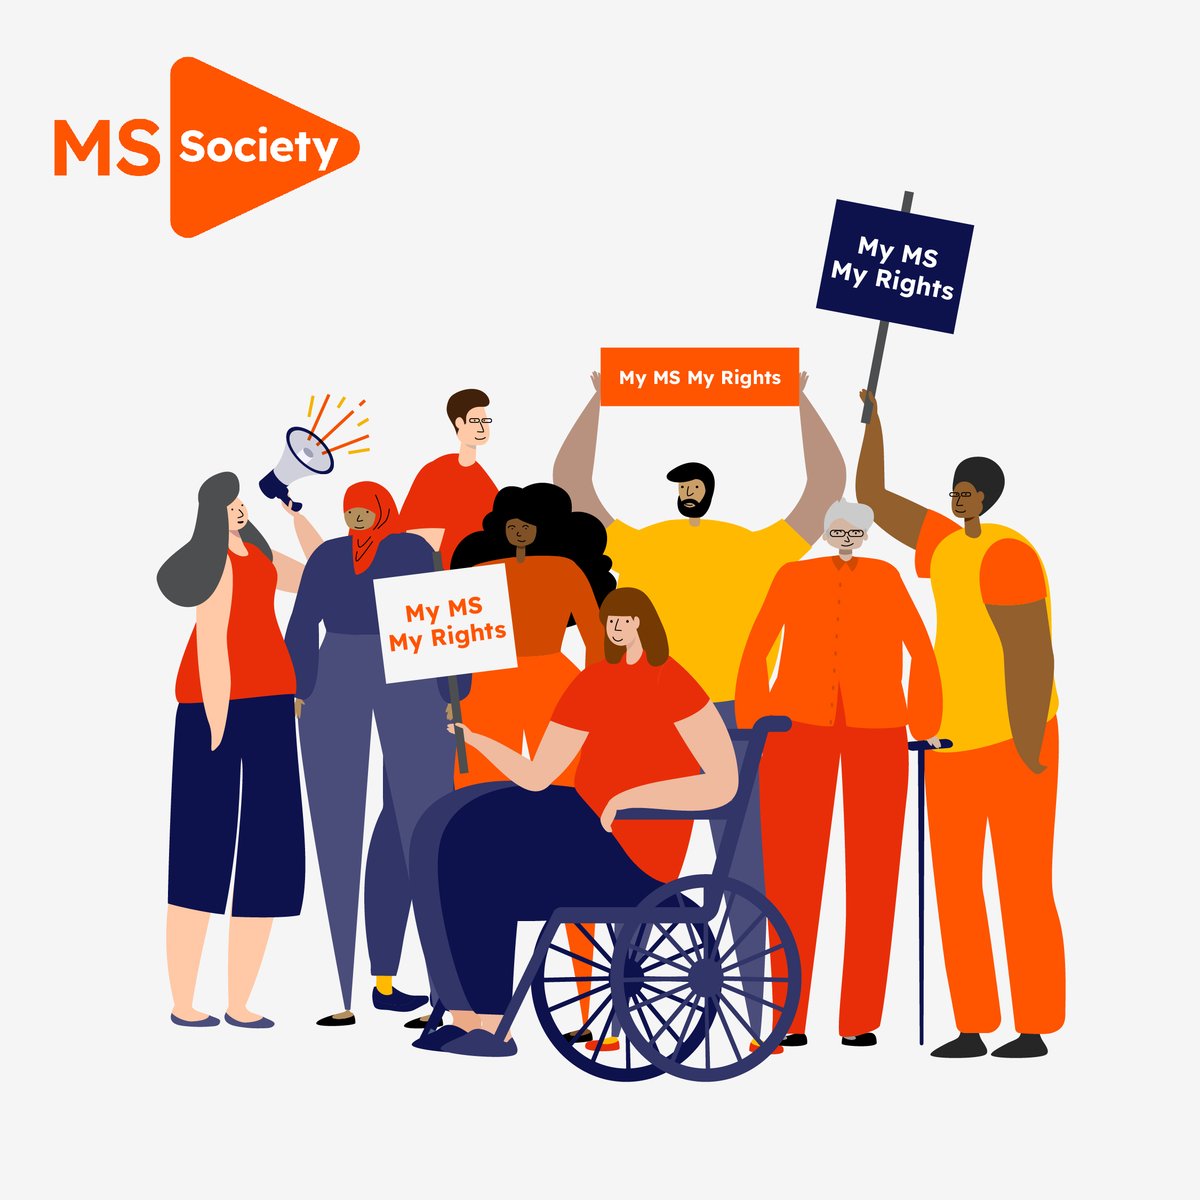 Have you read our MS manifesto yet? We co-produced it with the MS community, and it calls for the next UK Government to take action to transform the lives of people affected by MS. Join us to make sure MS is on the agenda of every candidate. ➡️mssoc.uk/3wEWBzX